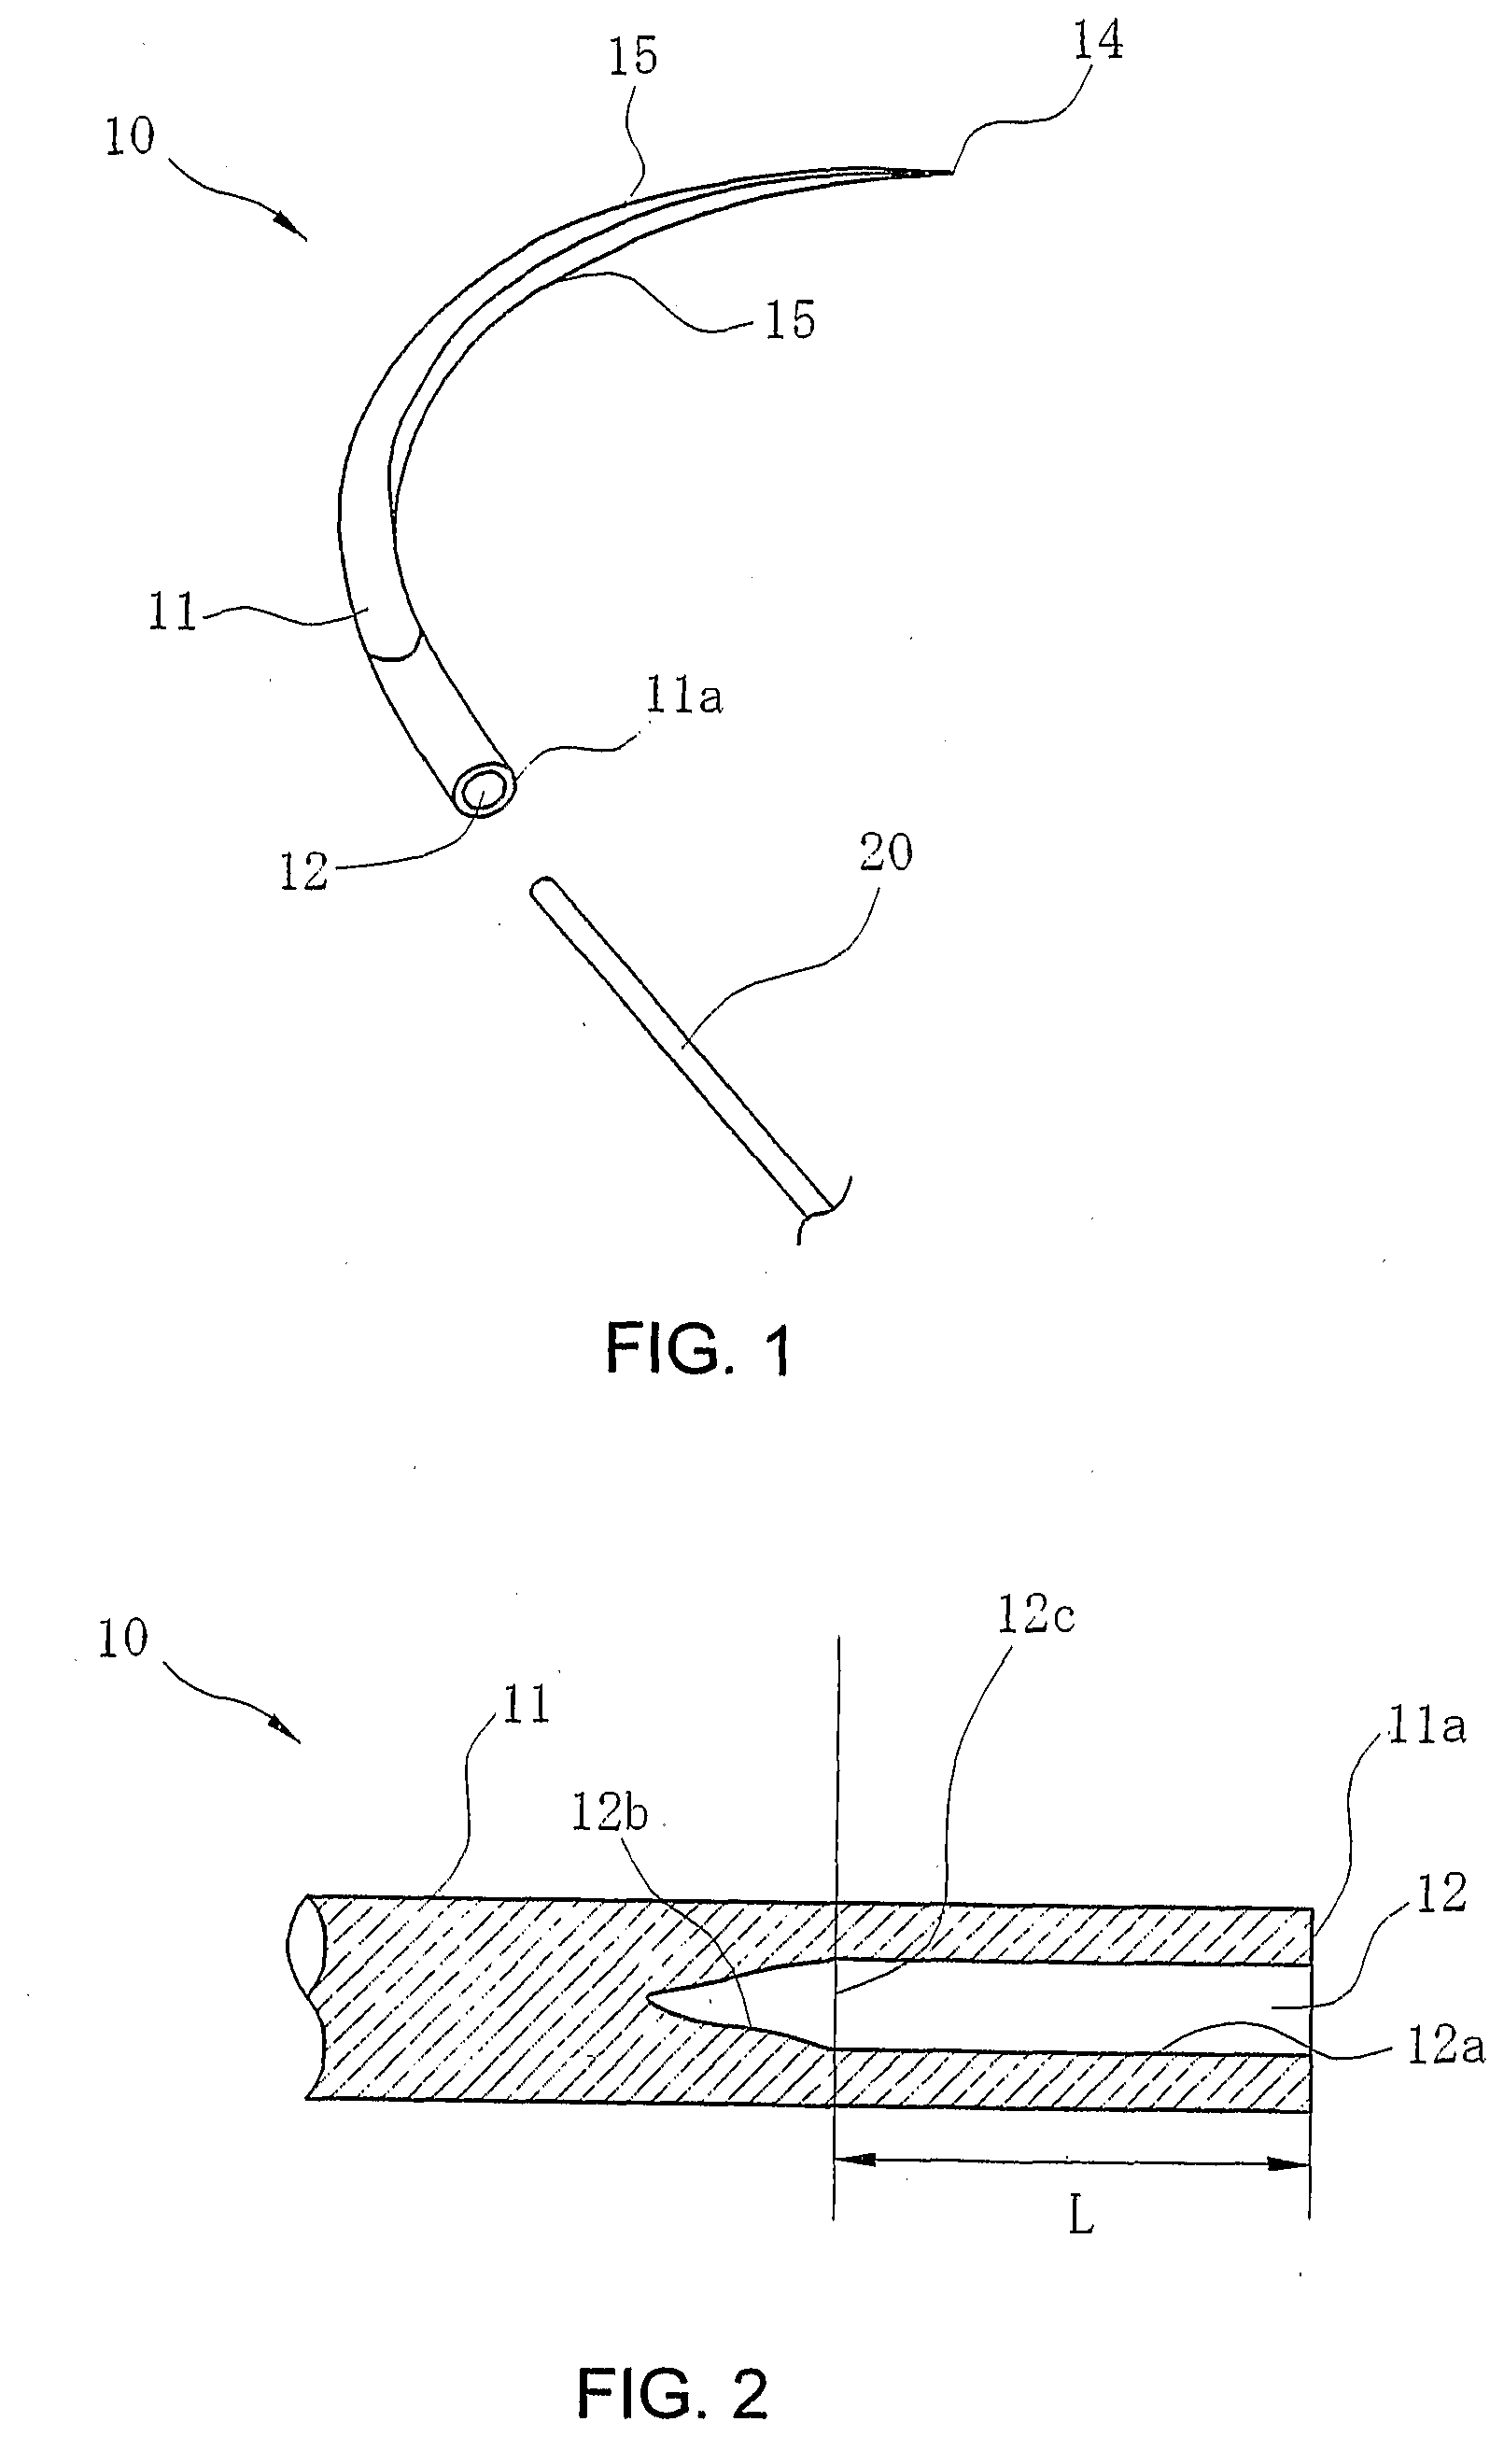 Eyeless Sewing Needle and Fabrication Method for the Same